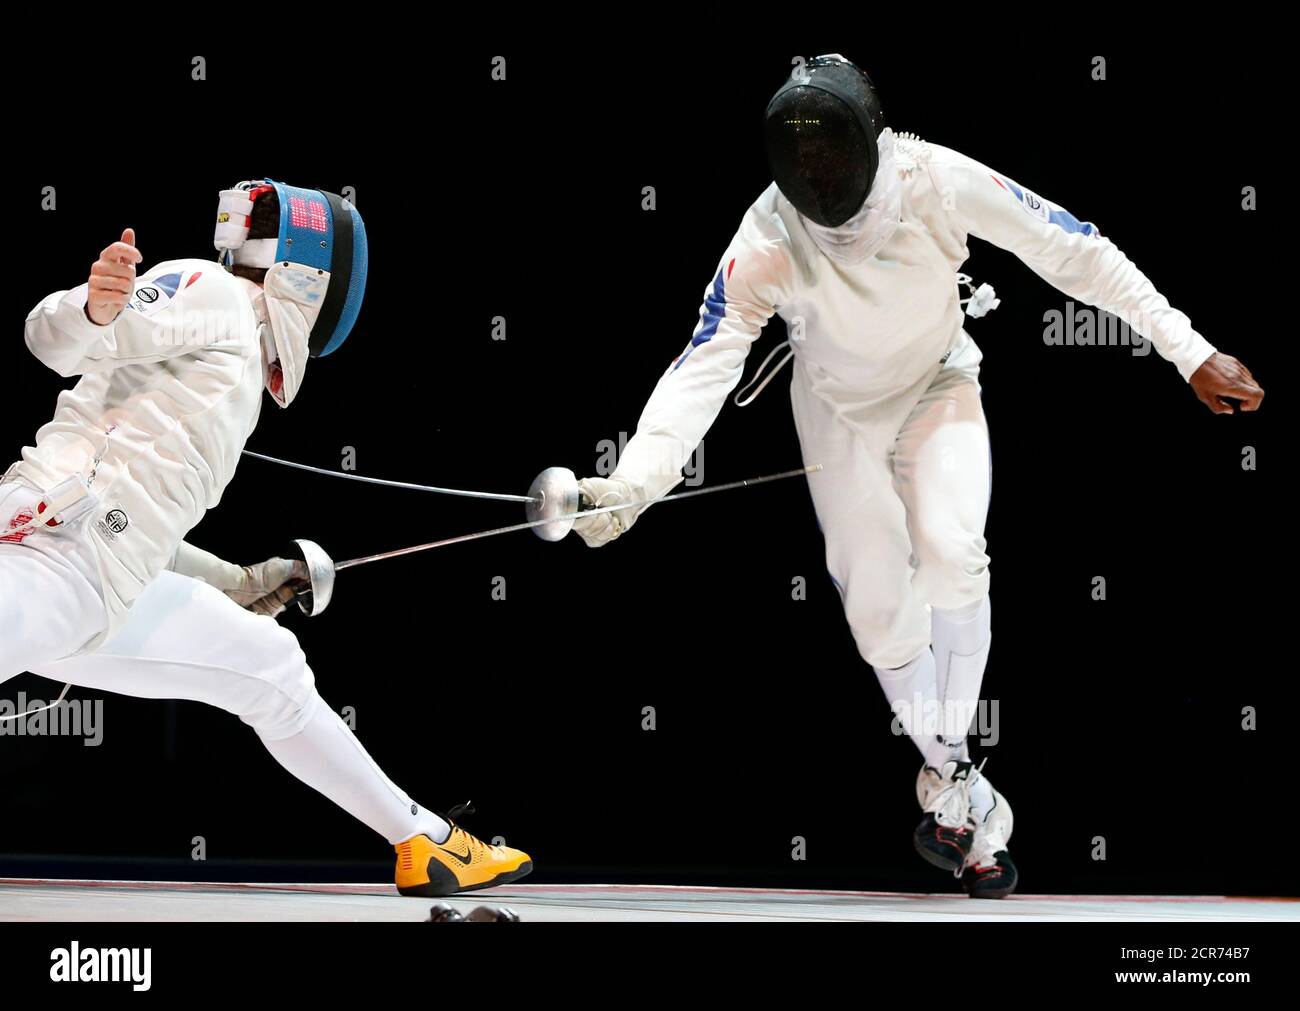 Gauthier Grumier (L) of France competes against his compatriot Ulrich  Robeiri during their men's epee semi-final at the World Fencing  Championships in Kazan July 20, 2014. REUTERS/Grigory Dukor (RUSSIA - Tags:  SPORT